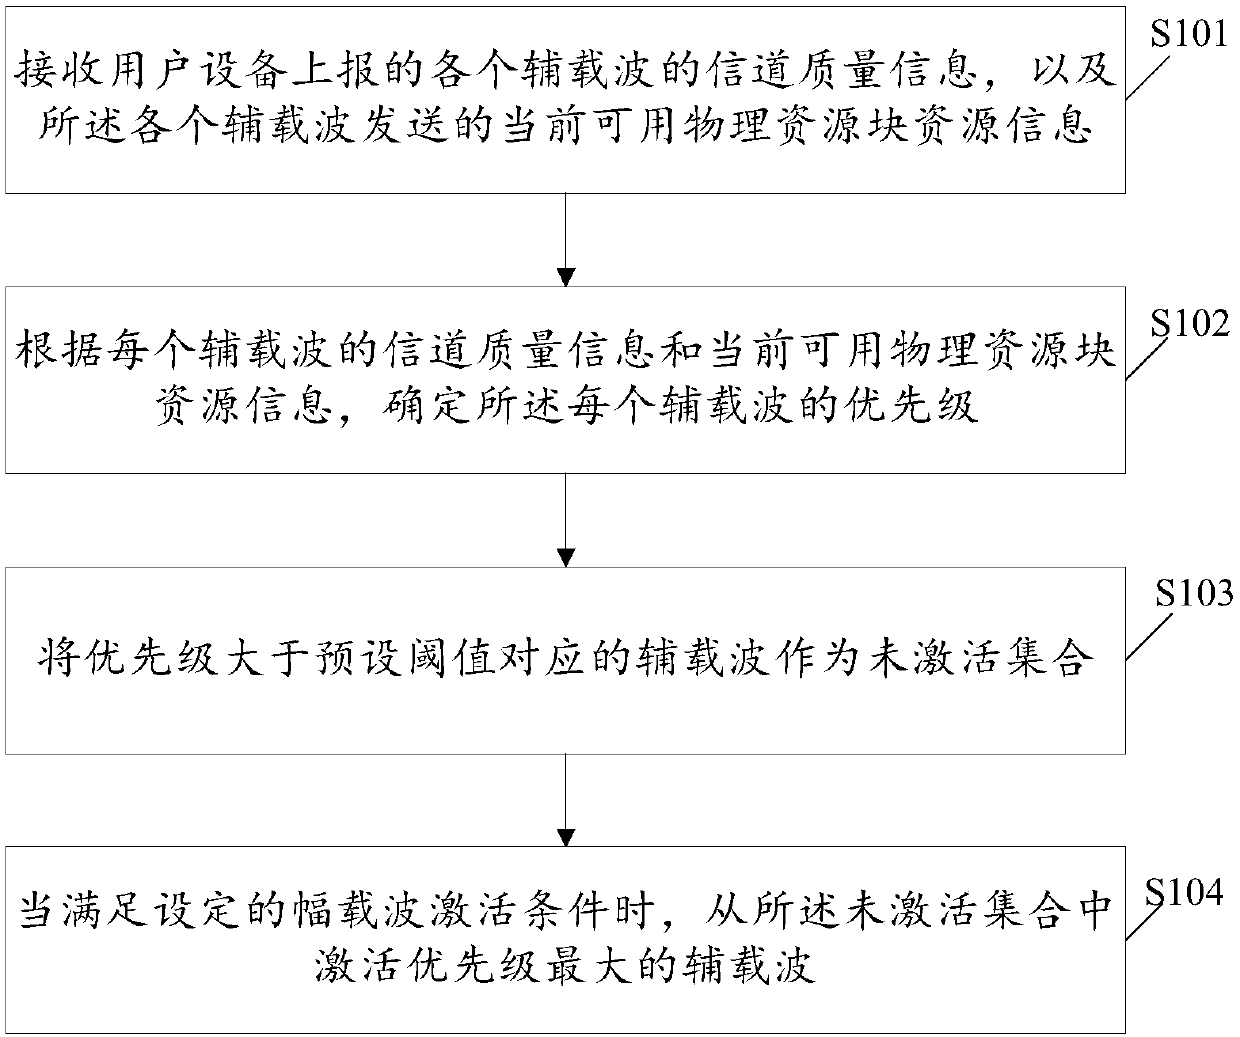 Multi-carrier aggregated auxiliary carrier management method and base station